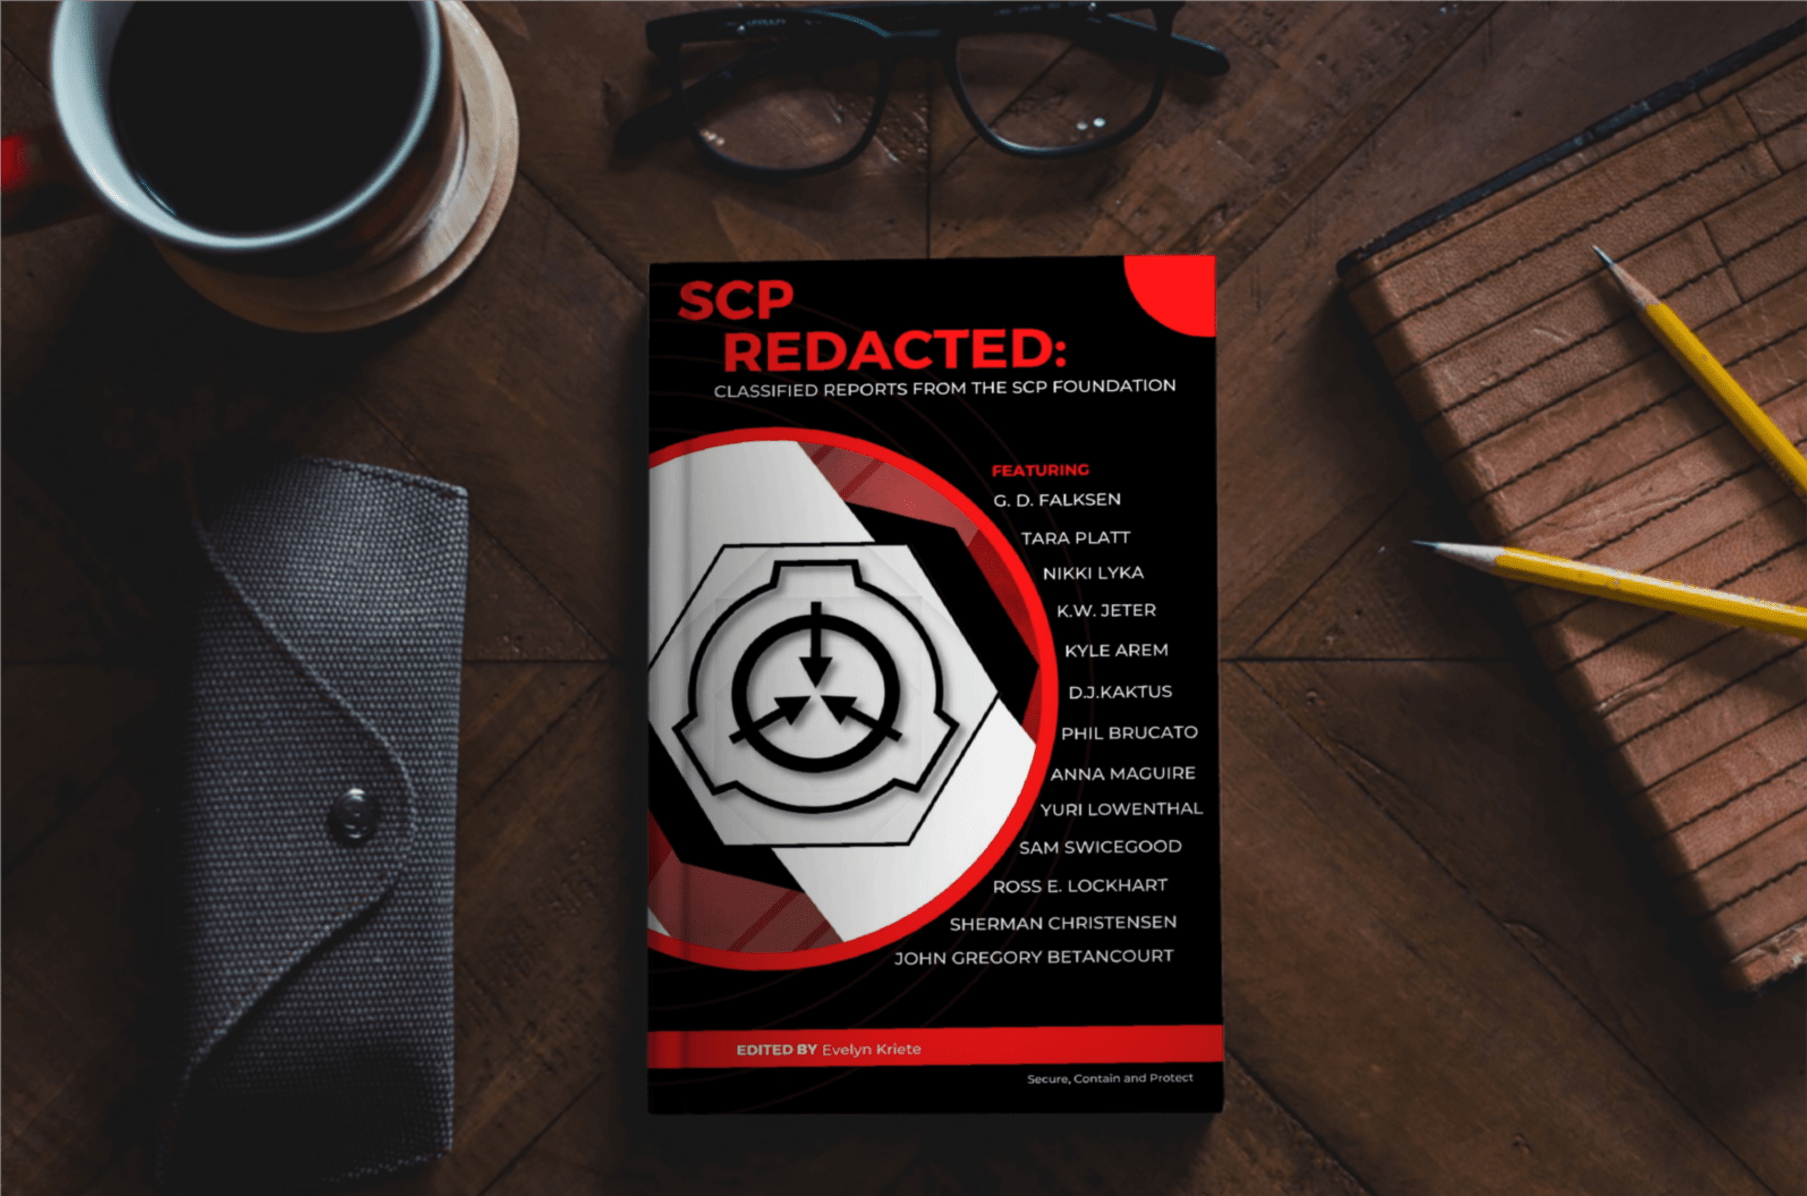 SCP The Tabletop RPG - 26 Letter Publishing